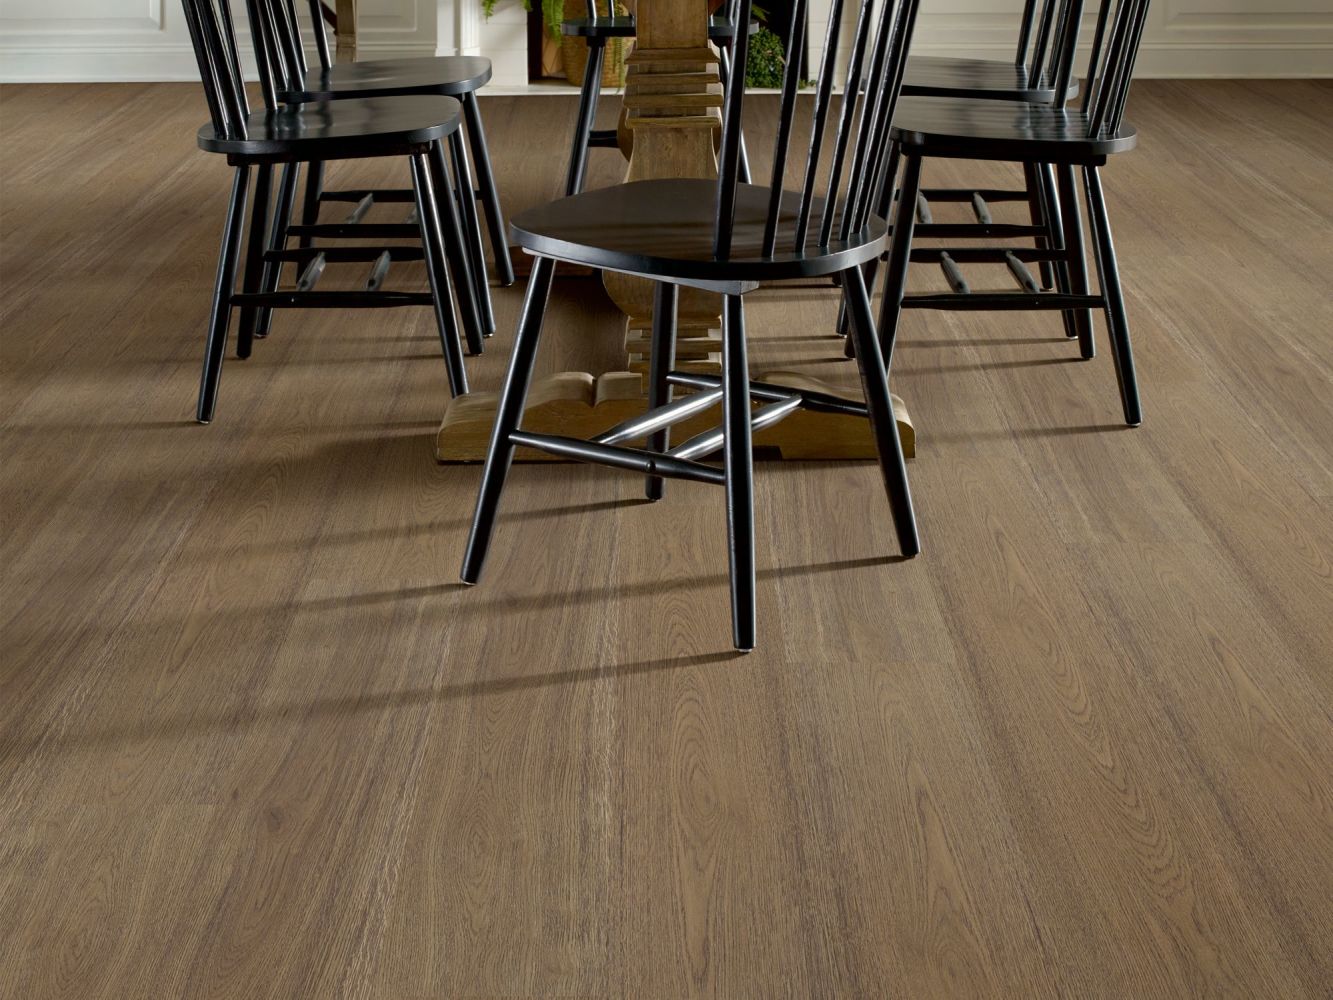 Shaw Floors Resilient Residential Prodigy Hdr Plus Glogg 07203_2038V